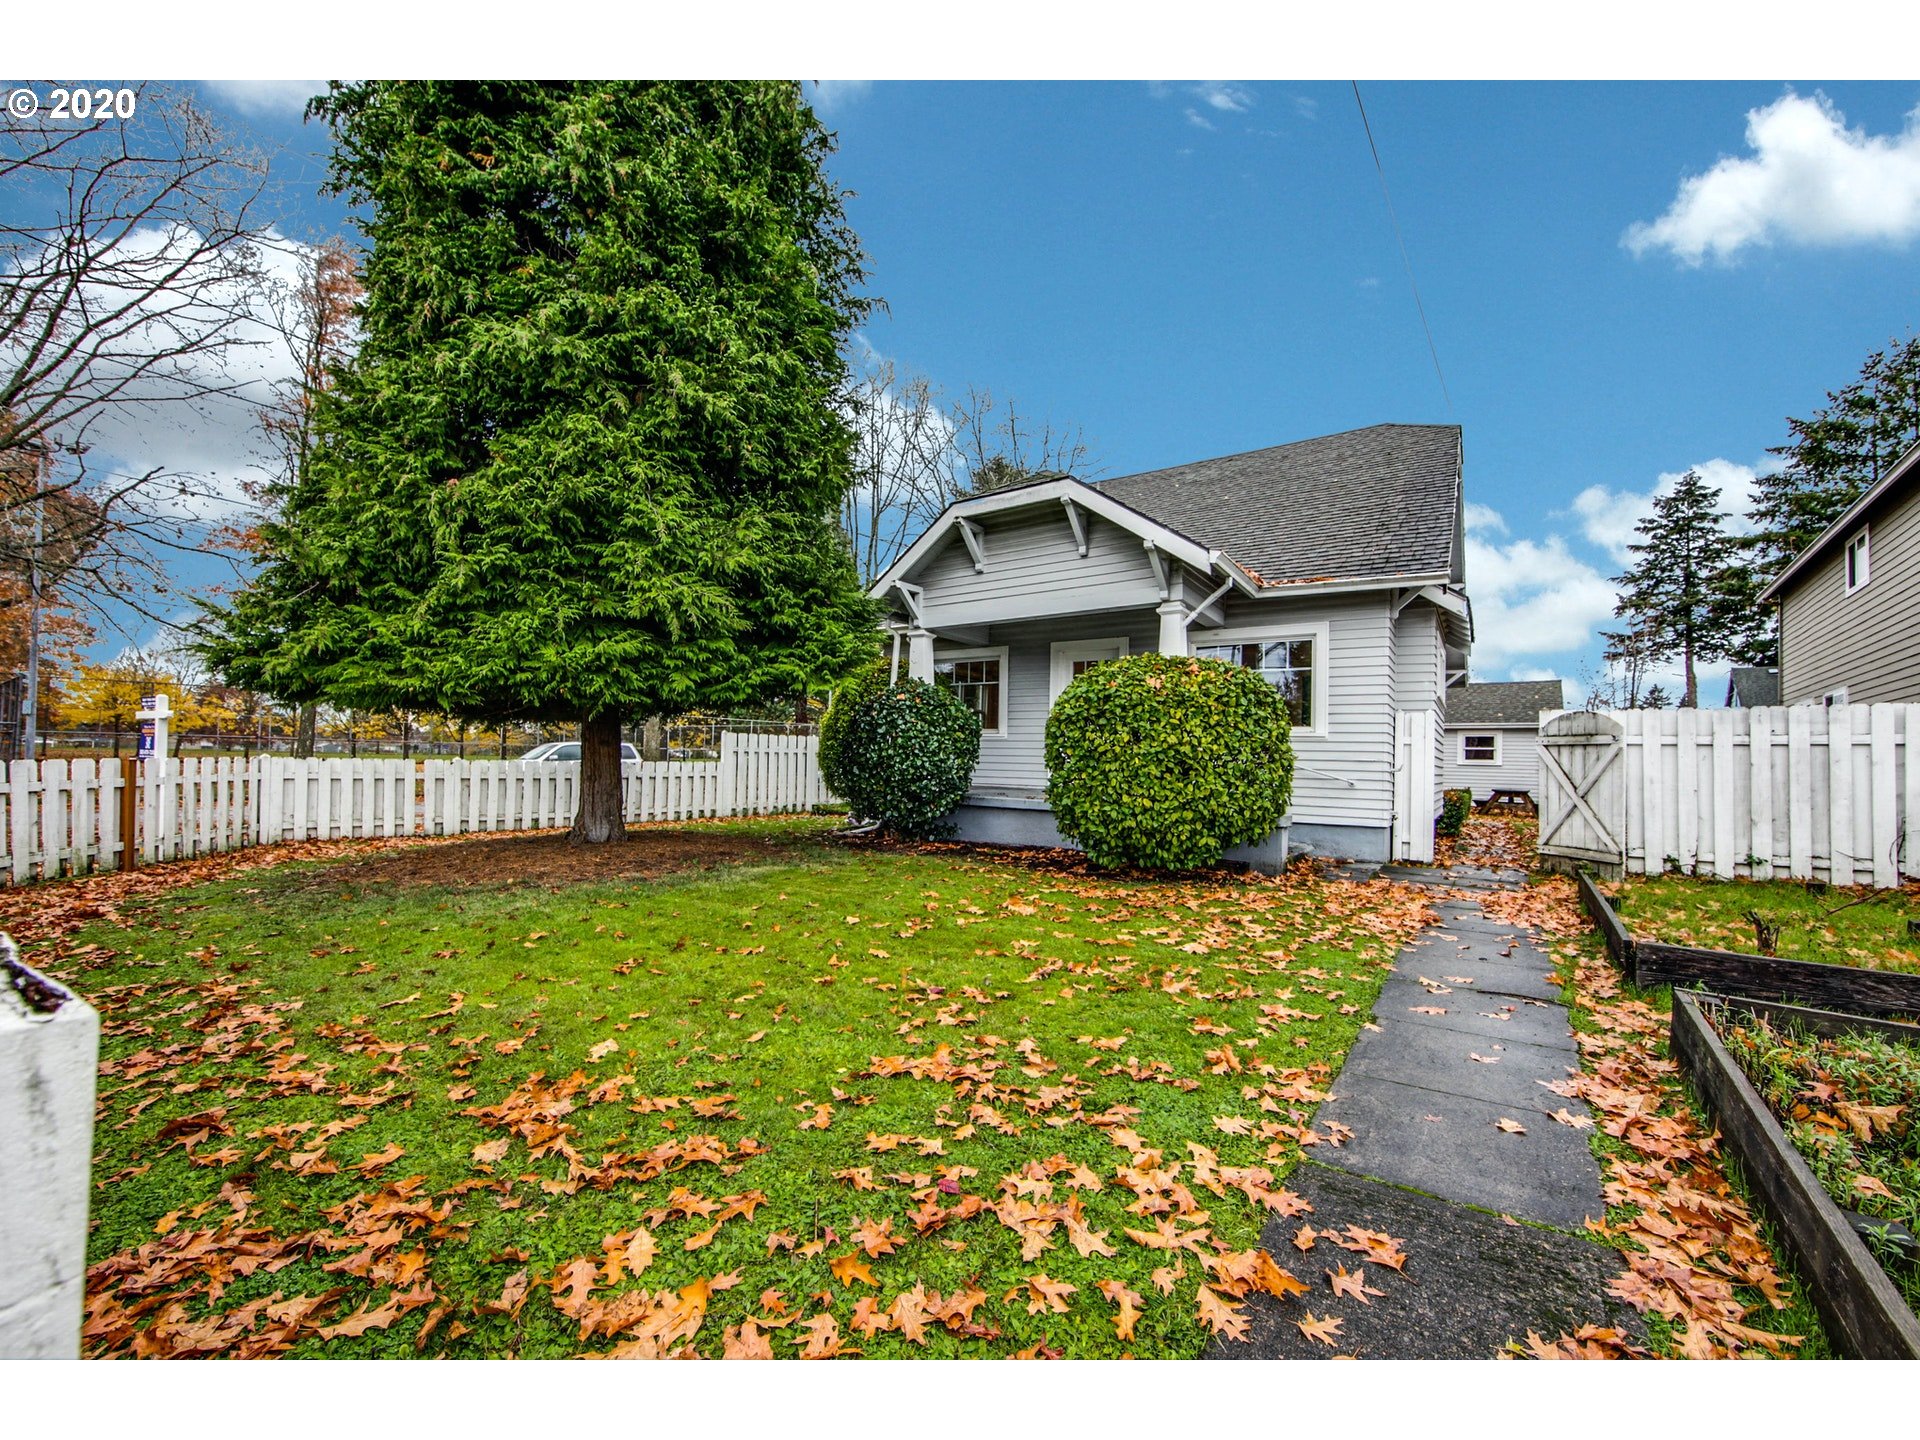 6541 SE 89TH AVE (1 of 28)